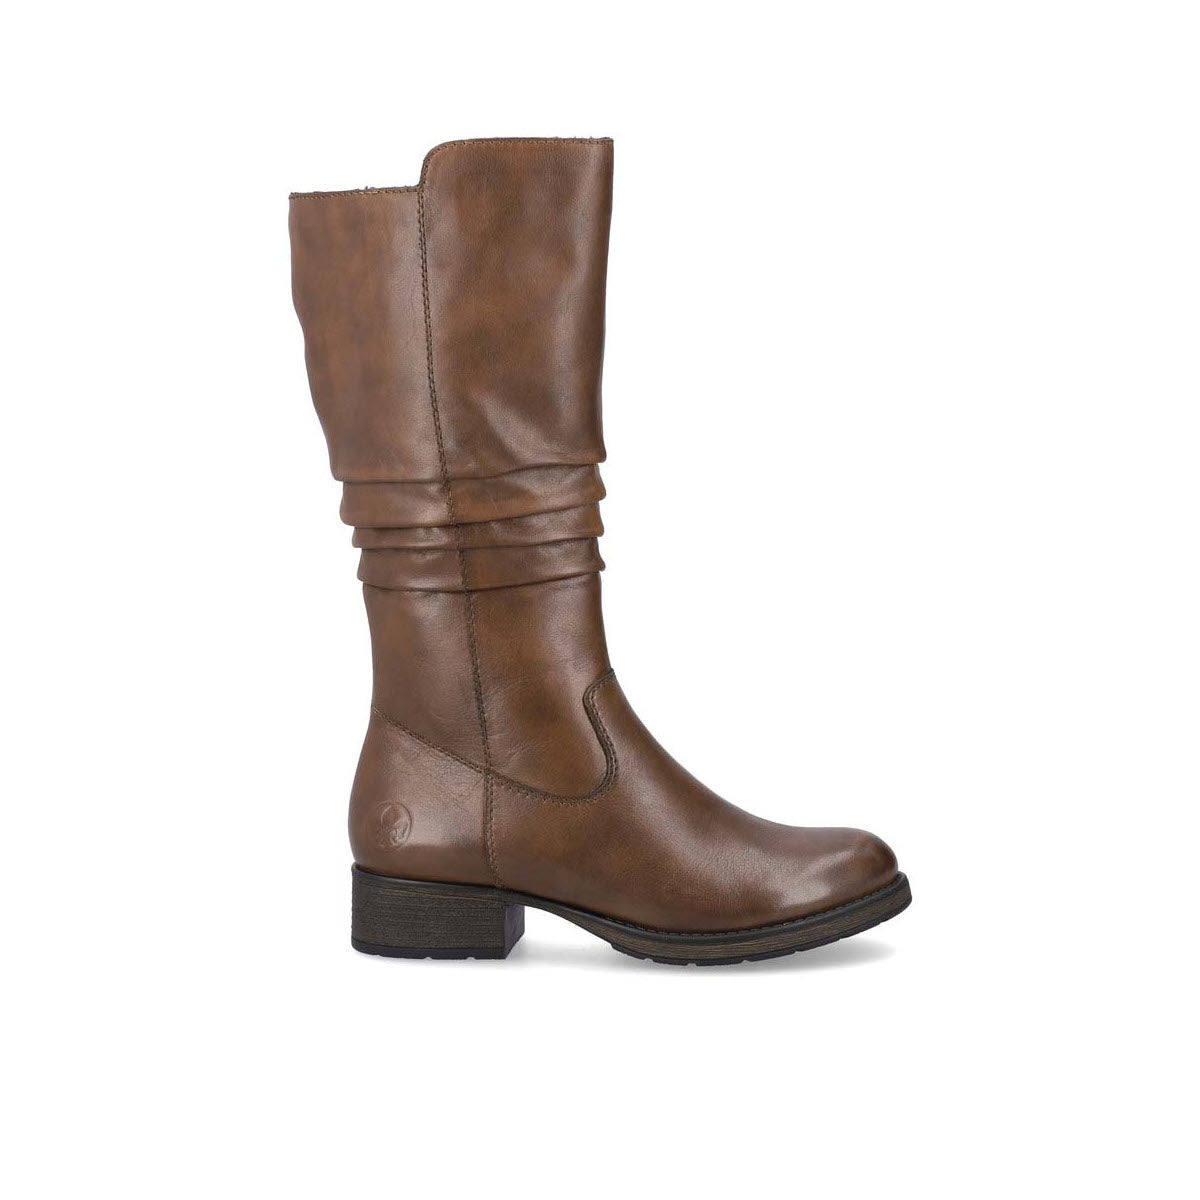 A single Rieker brown breathable leather mid-calf boot with a low heel on a white background.